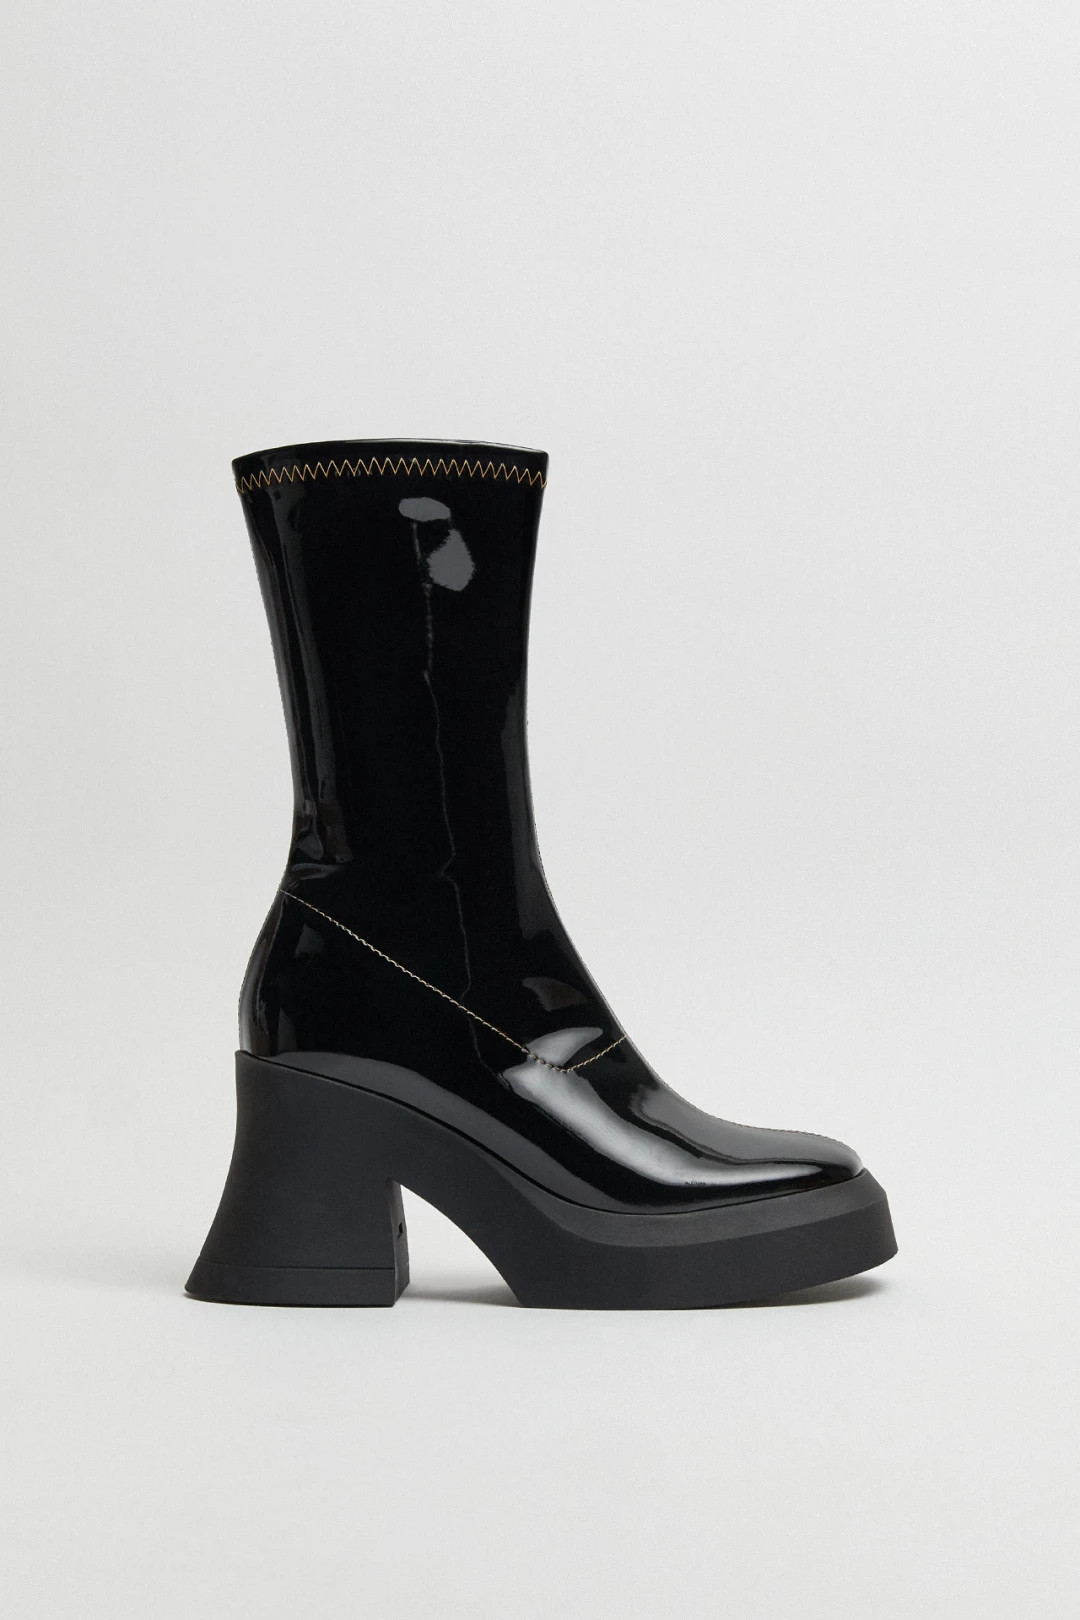 Aura Black Stretch Ankle Boots | Miista Europe | Made in Portugal